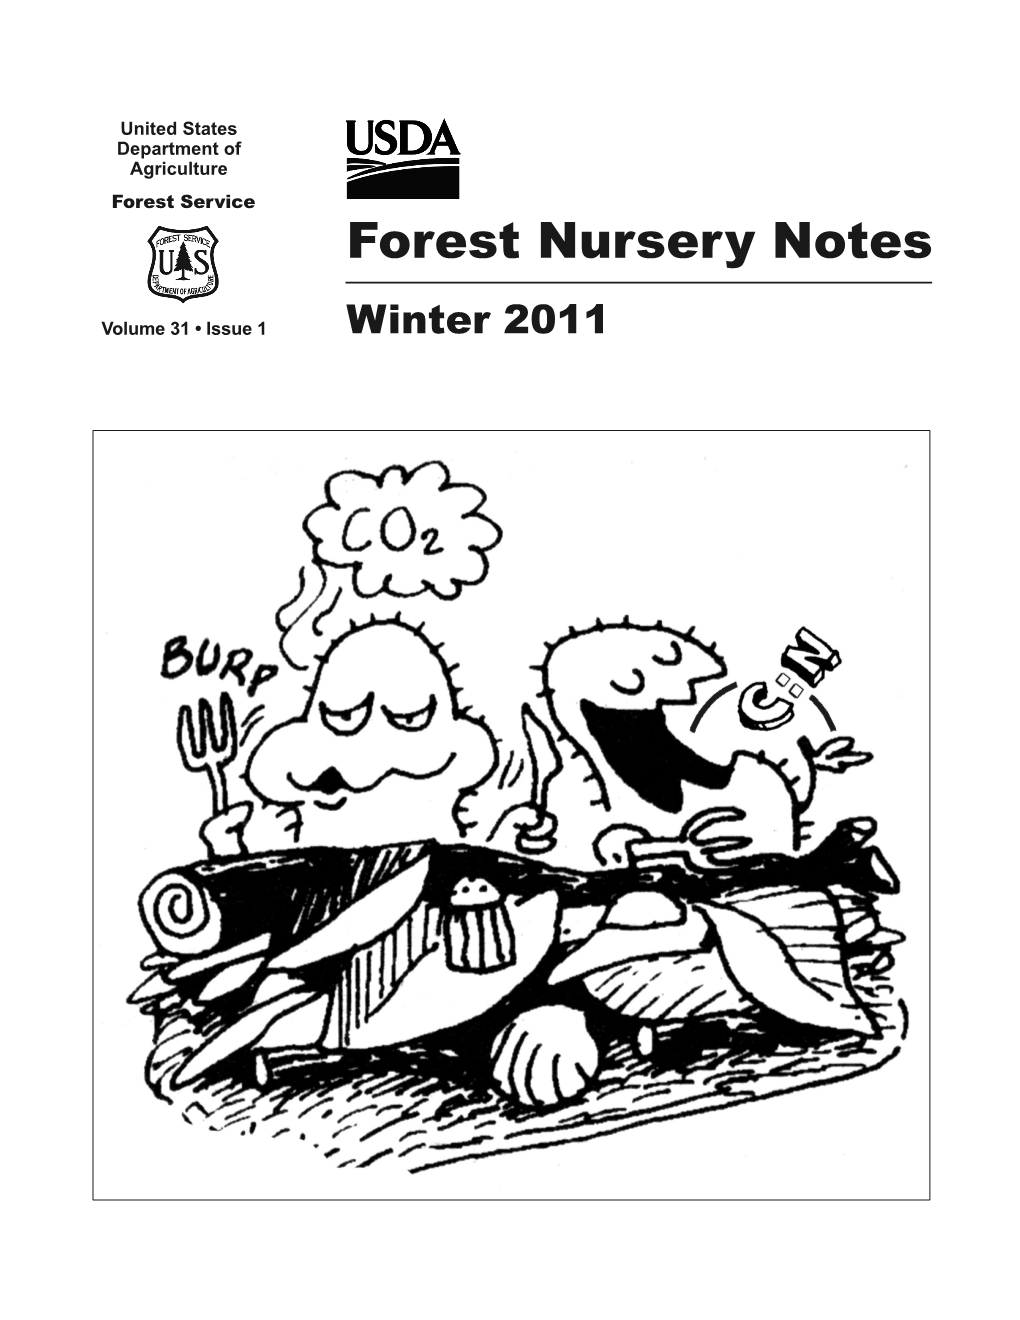 2011 Winter Forest Nursery Notes